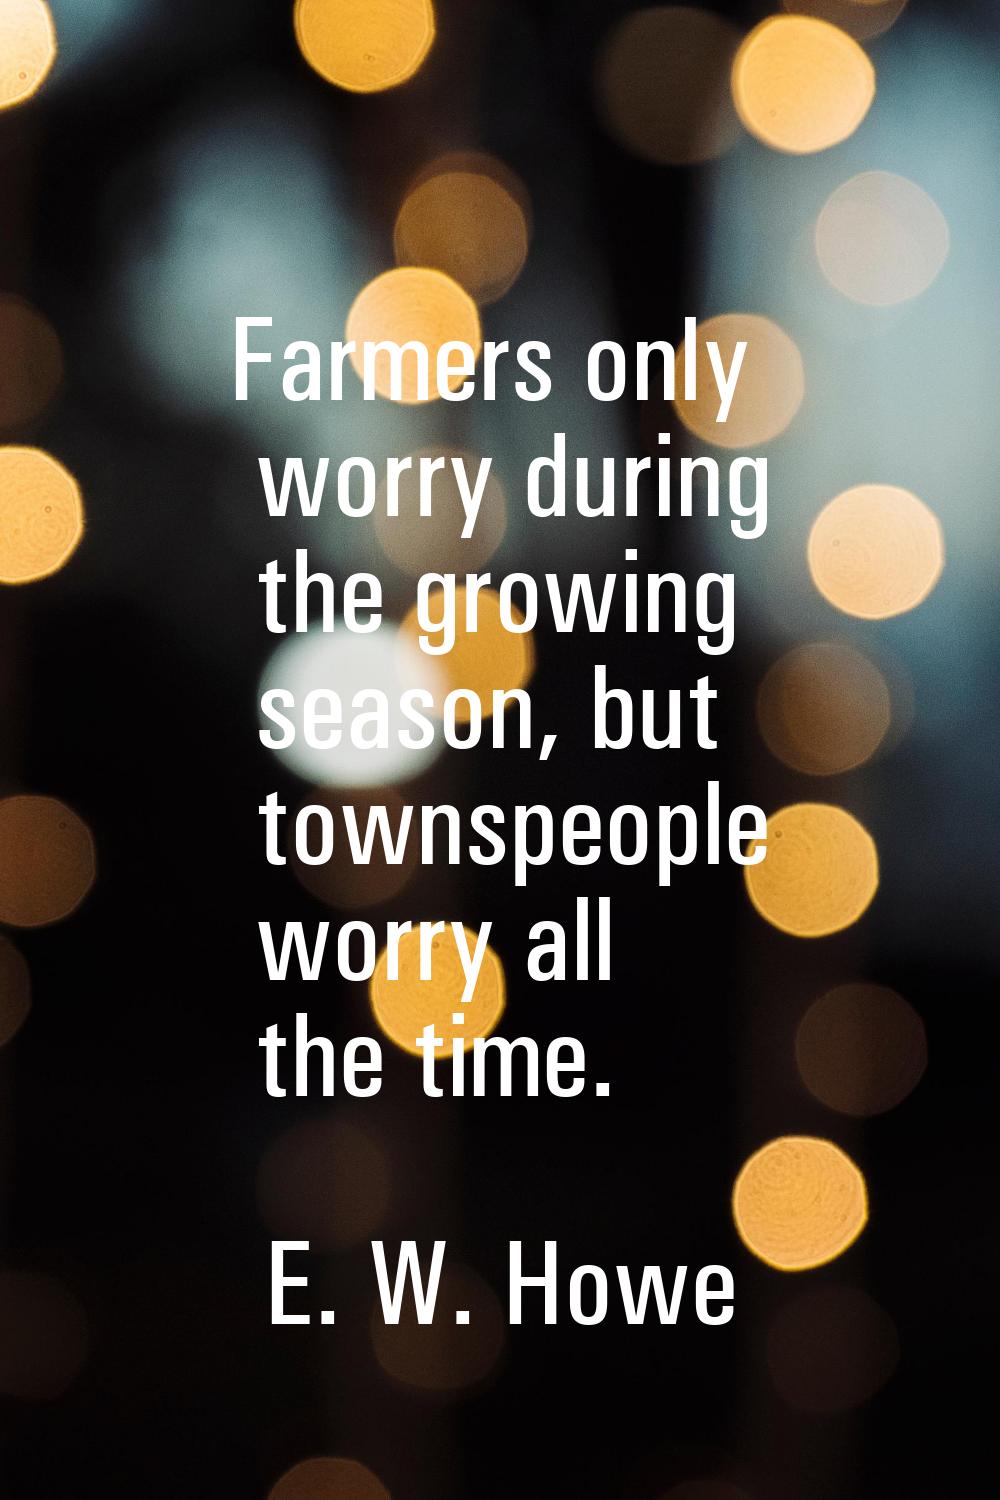 Farmers only worry during the growing season, but townspeople worry all the time.